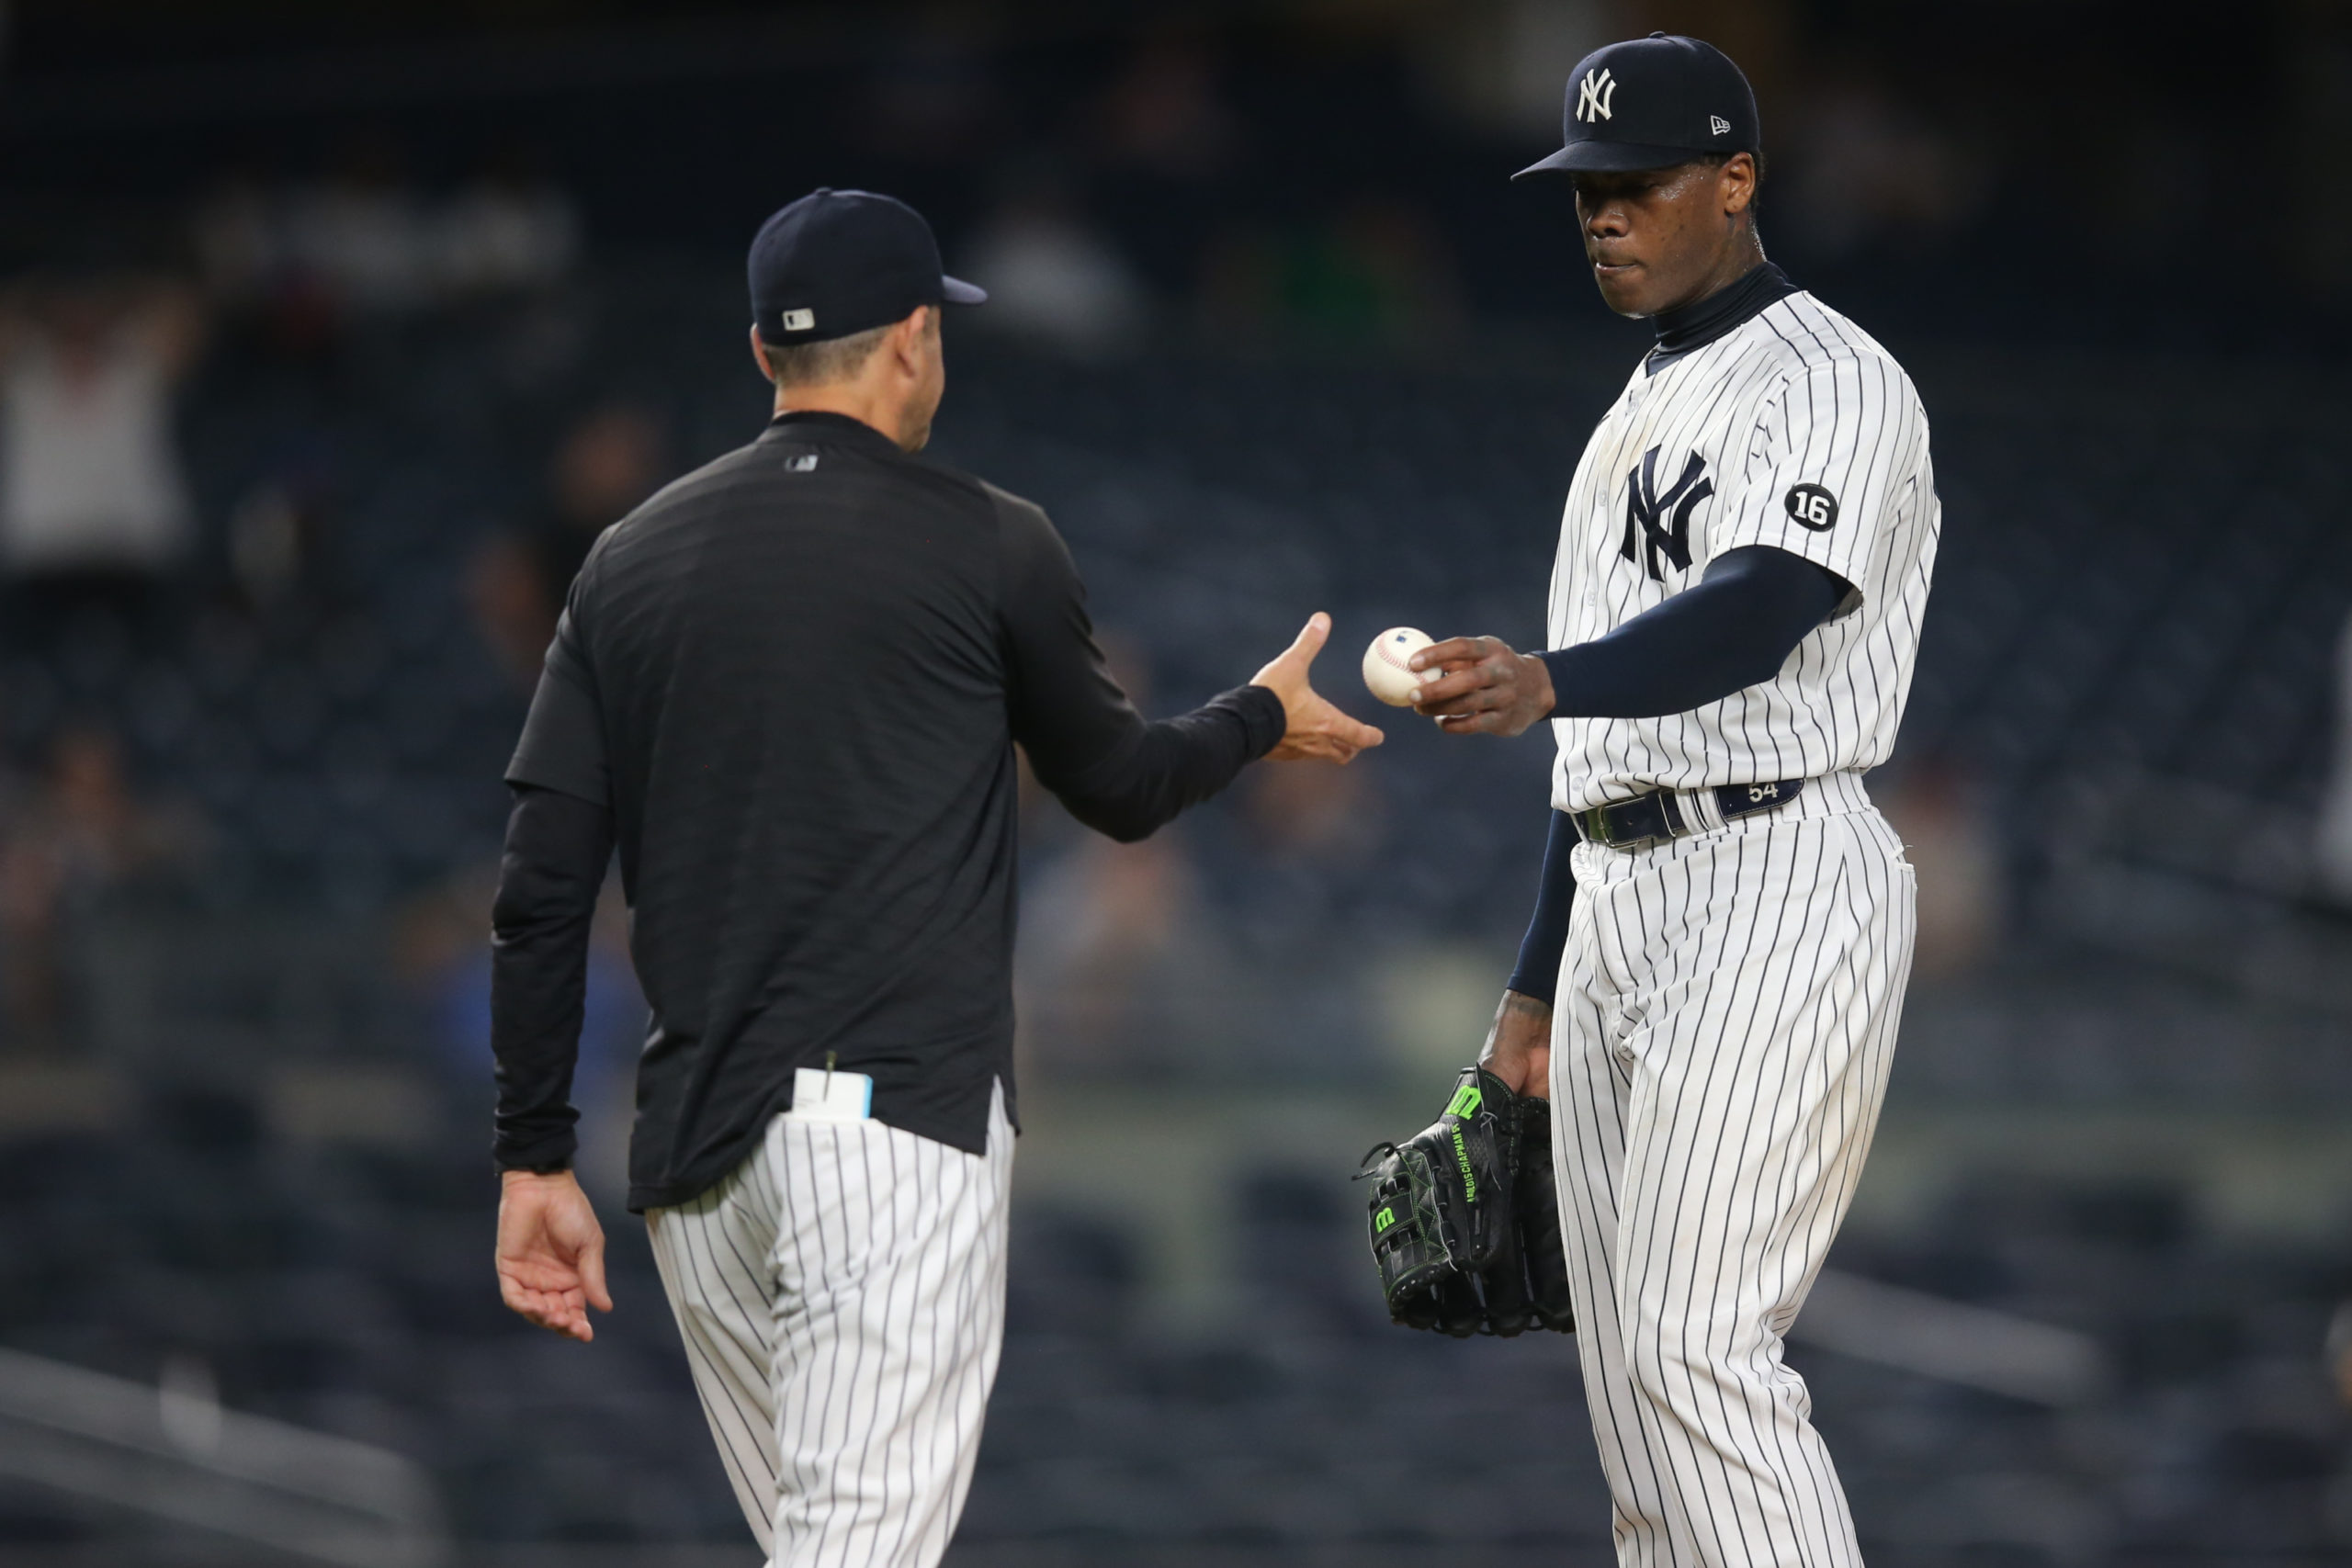 Who should be closing in the playoffs if the Yankees get there?